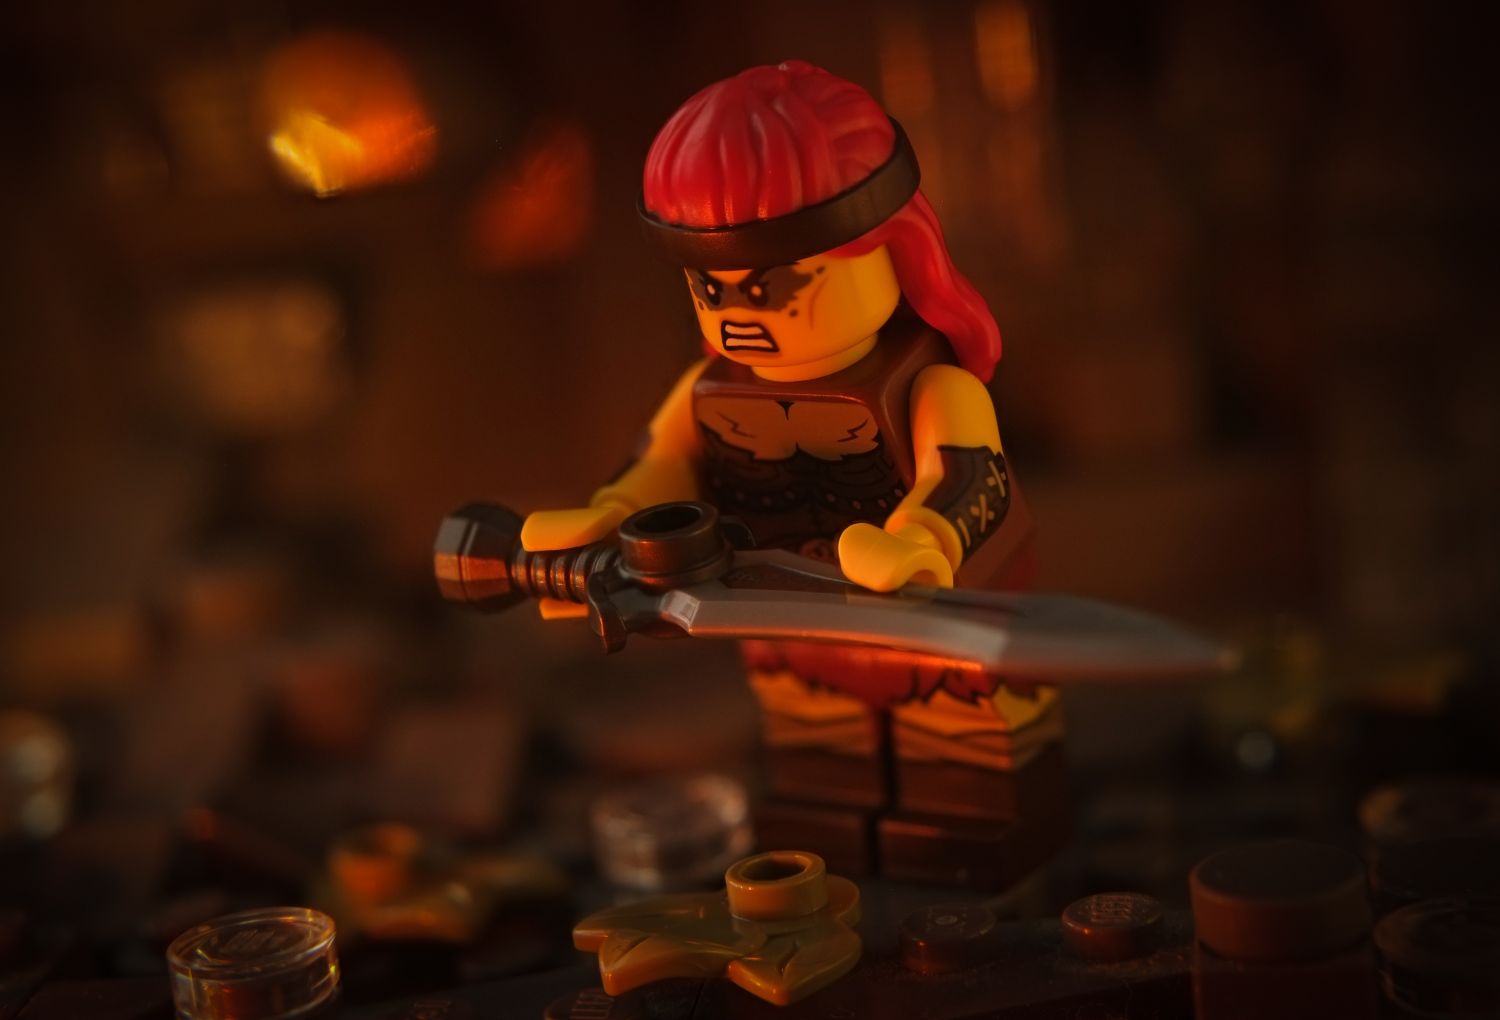 A LEGO barbarian minifigure holding a sword in He-Man I have the power way.